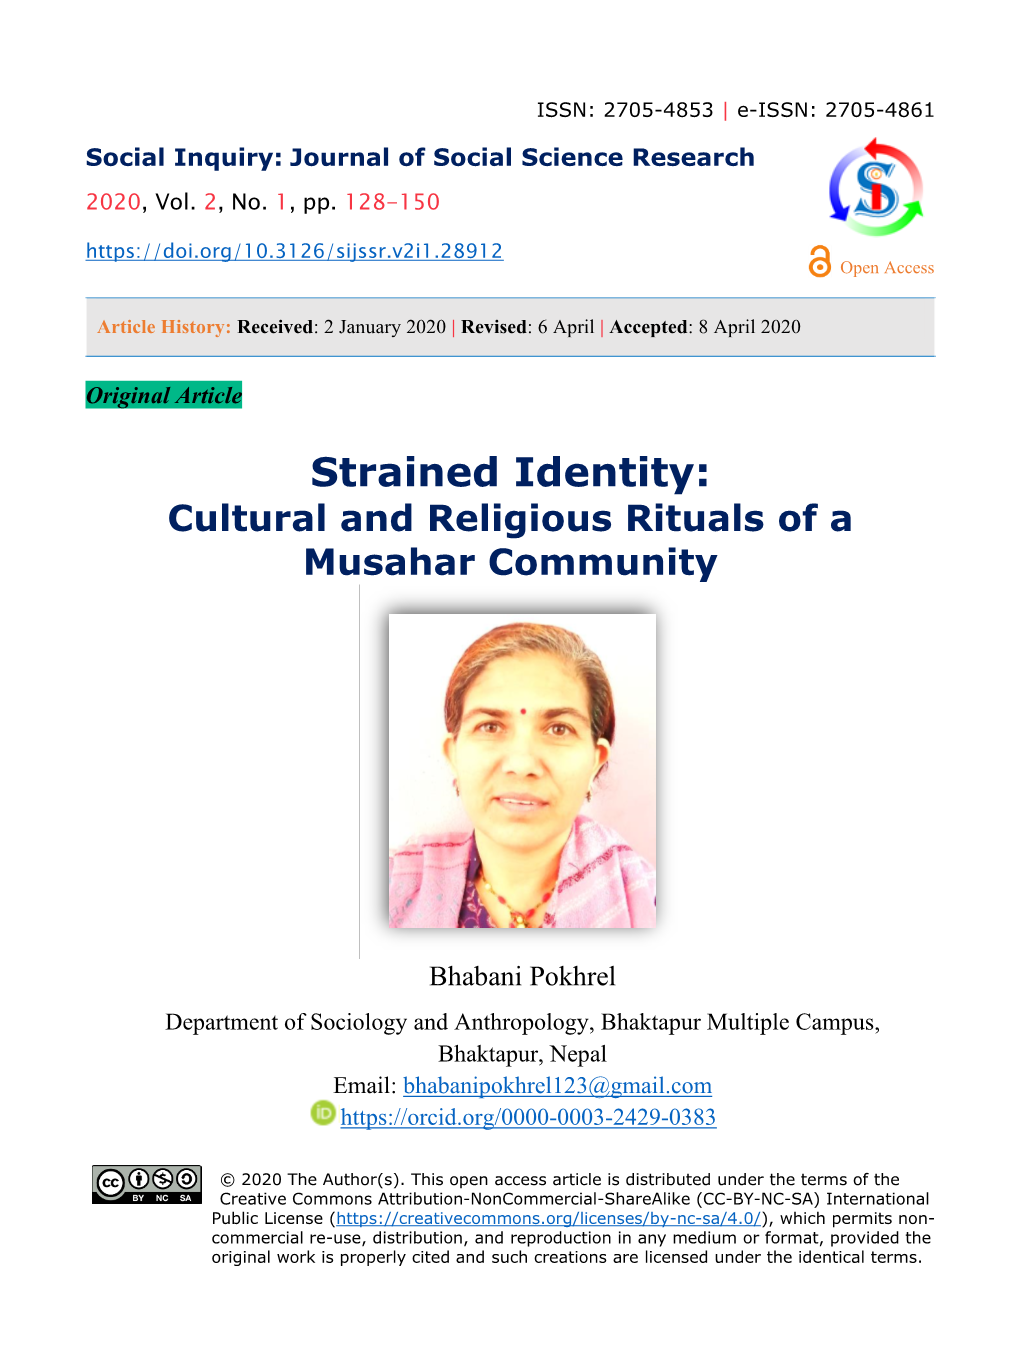 Strained Identity: Cultural and Religious Rituals of a Musahar Community